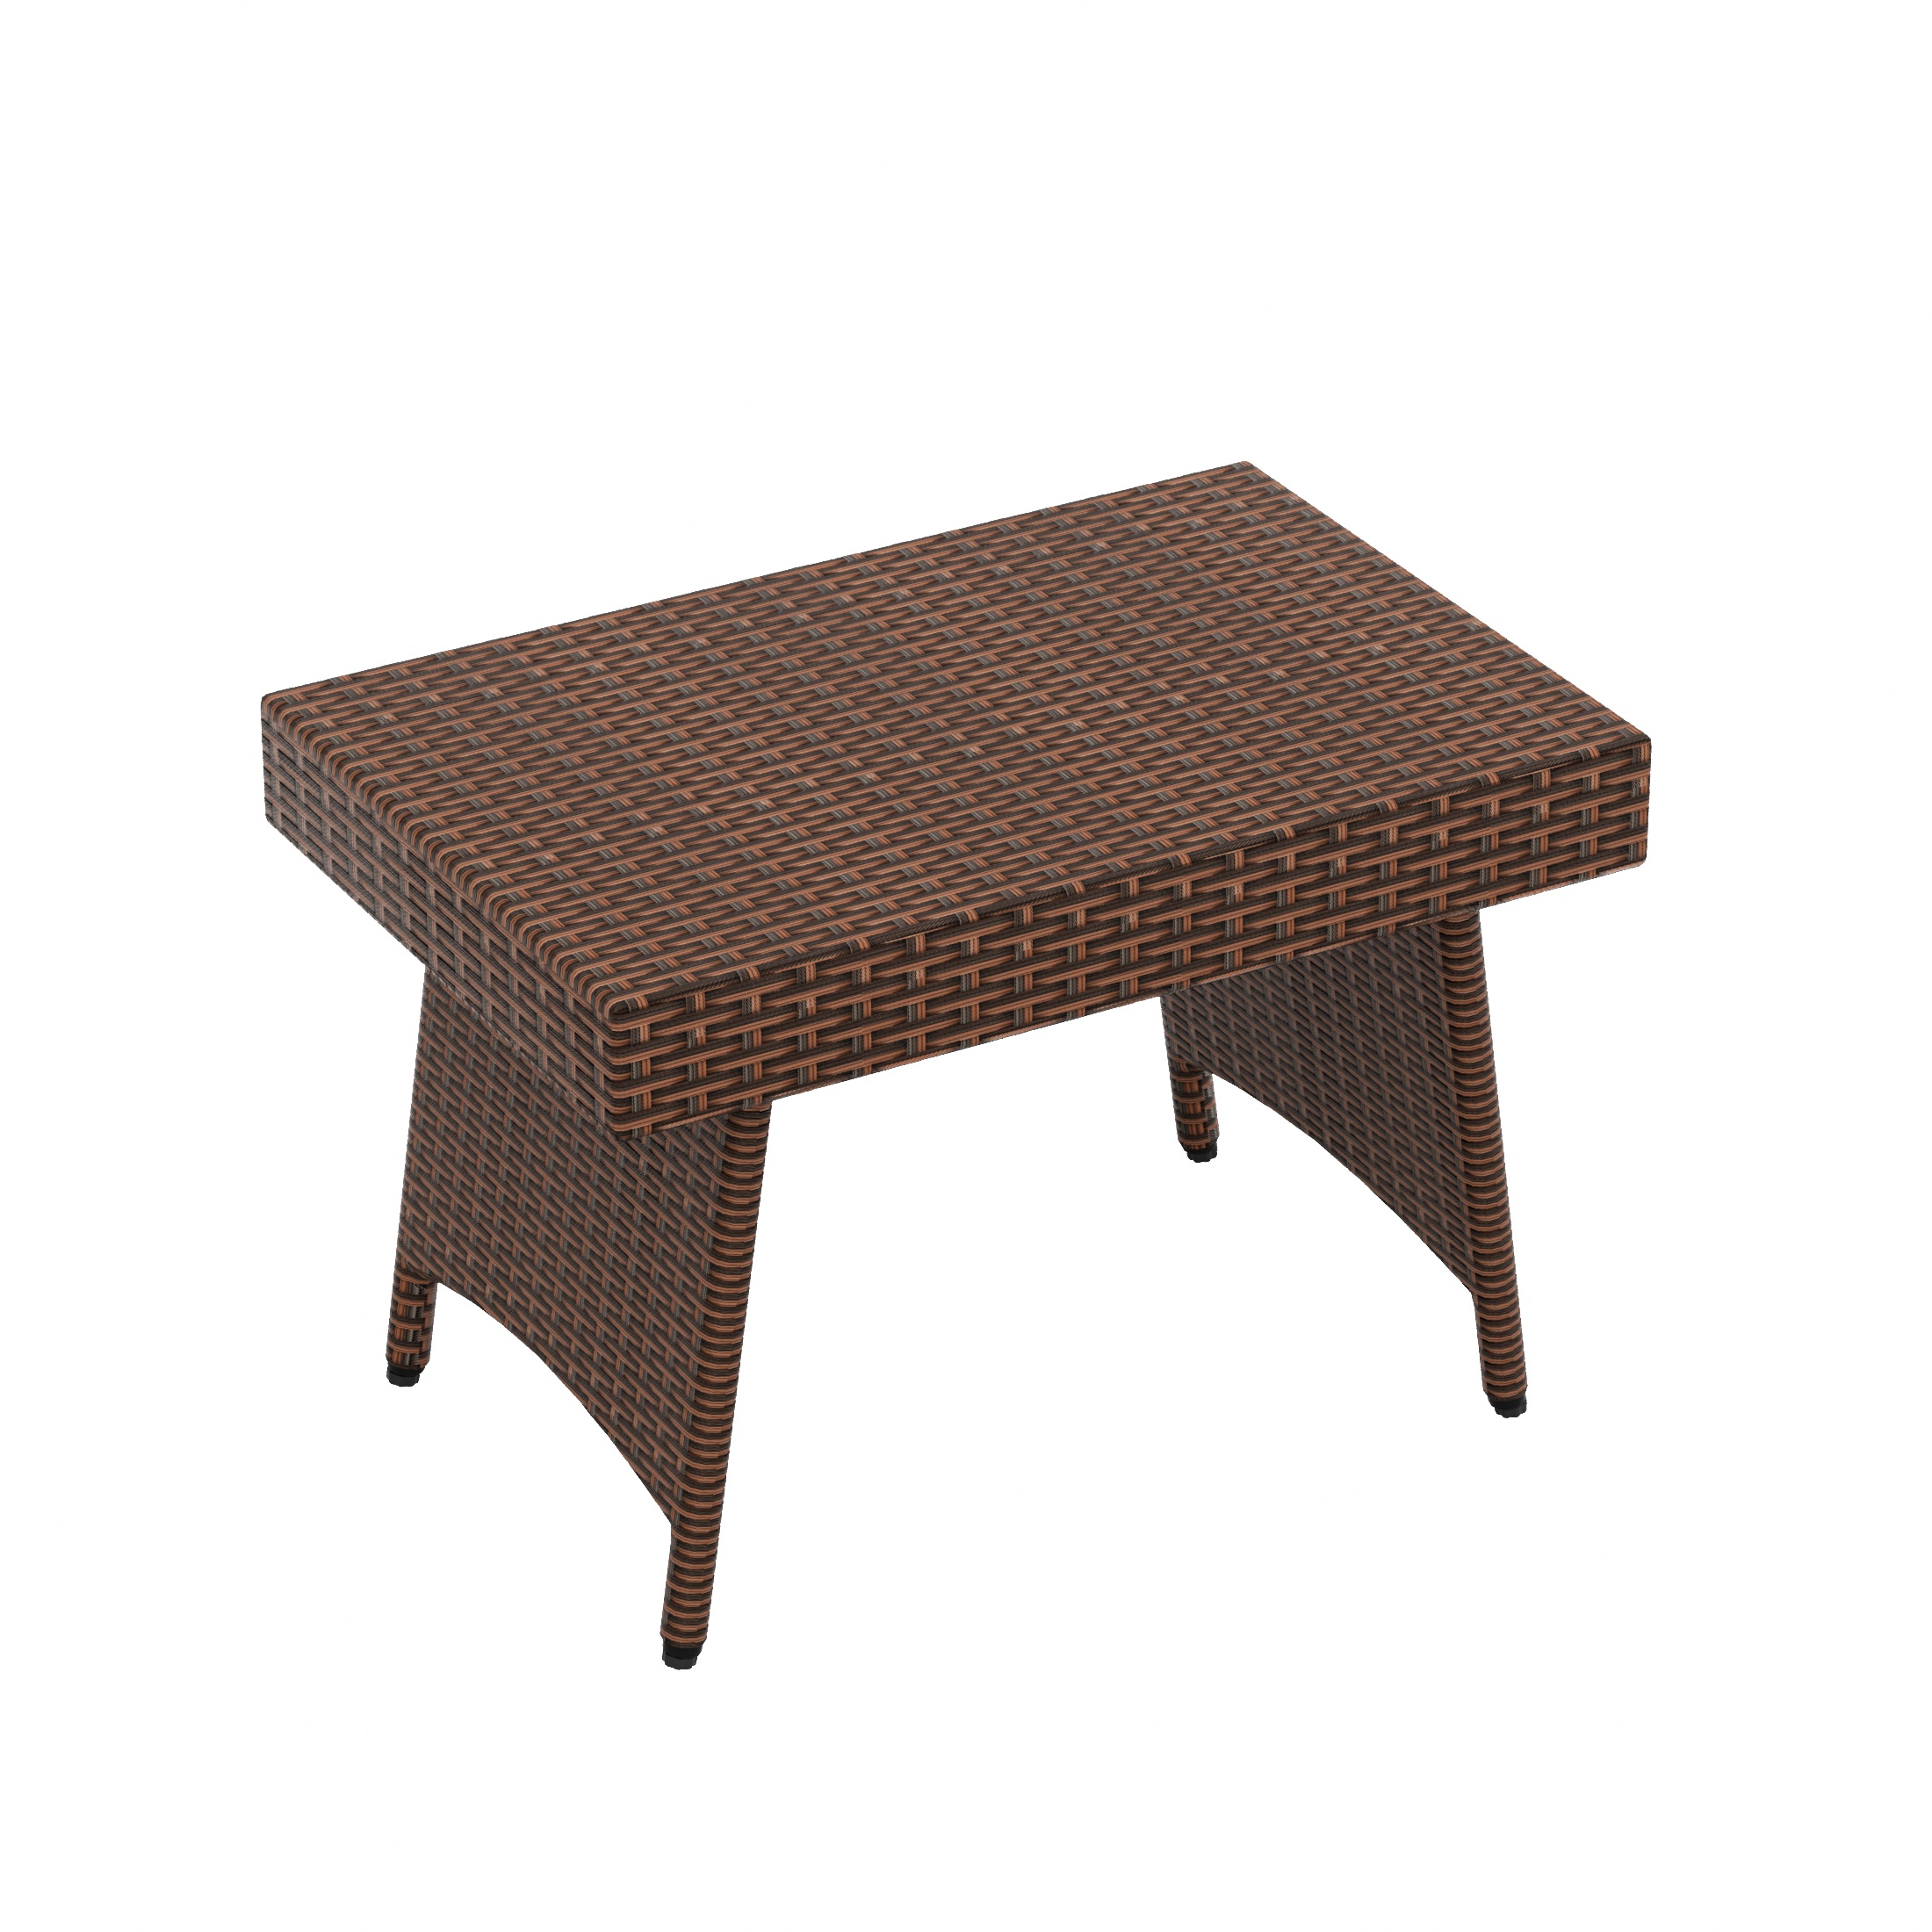 WestinTrends Coastal Outdoor Folding Side Table, 23" x 15" All Weather PE Rattan Wicker Small Patio Table Portable Picnic Table, Brown - image 1 of 7